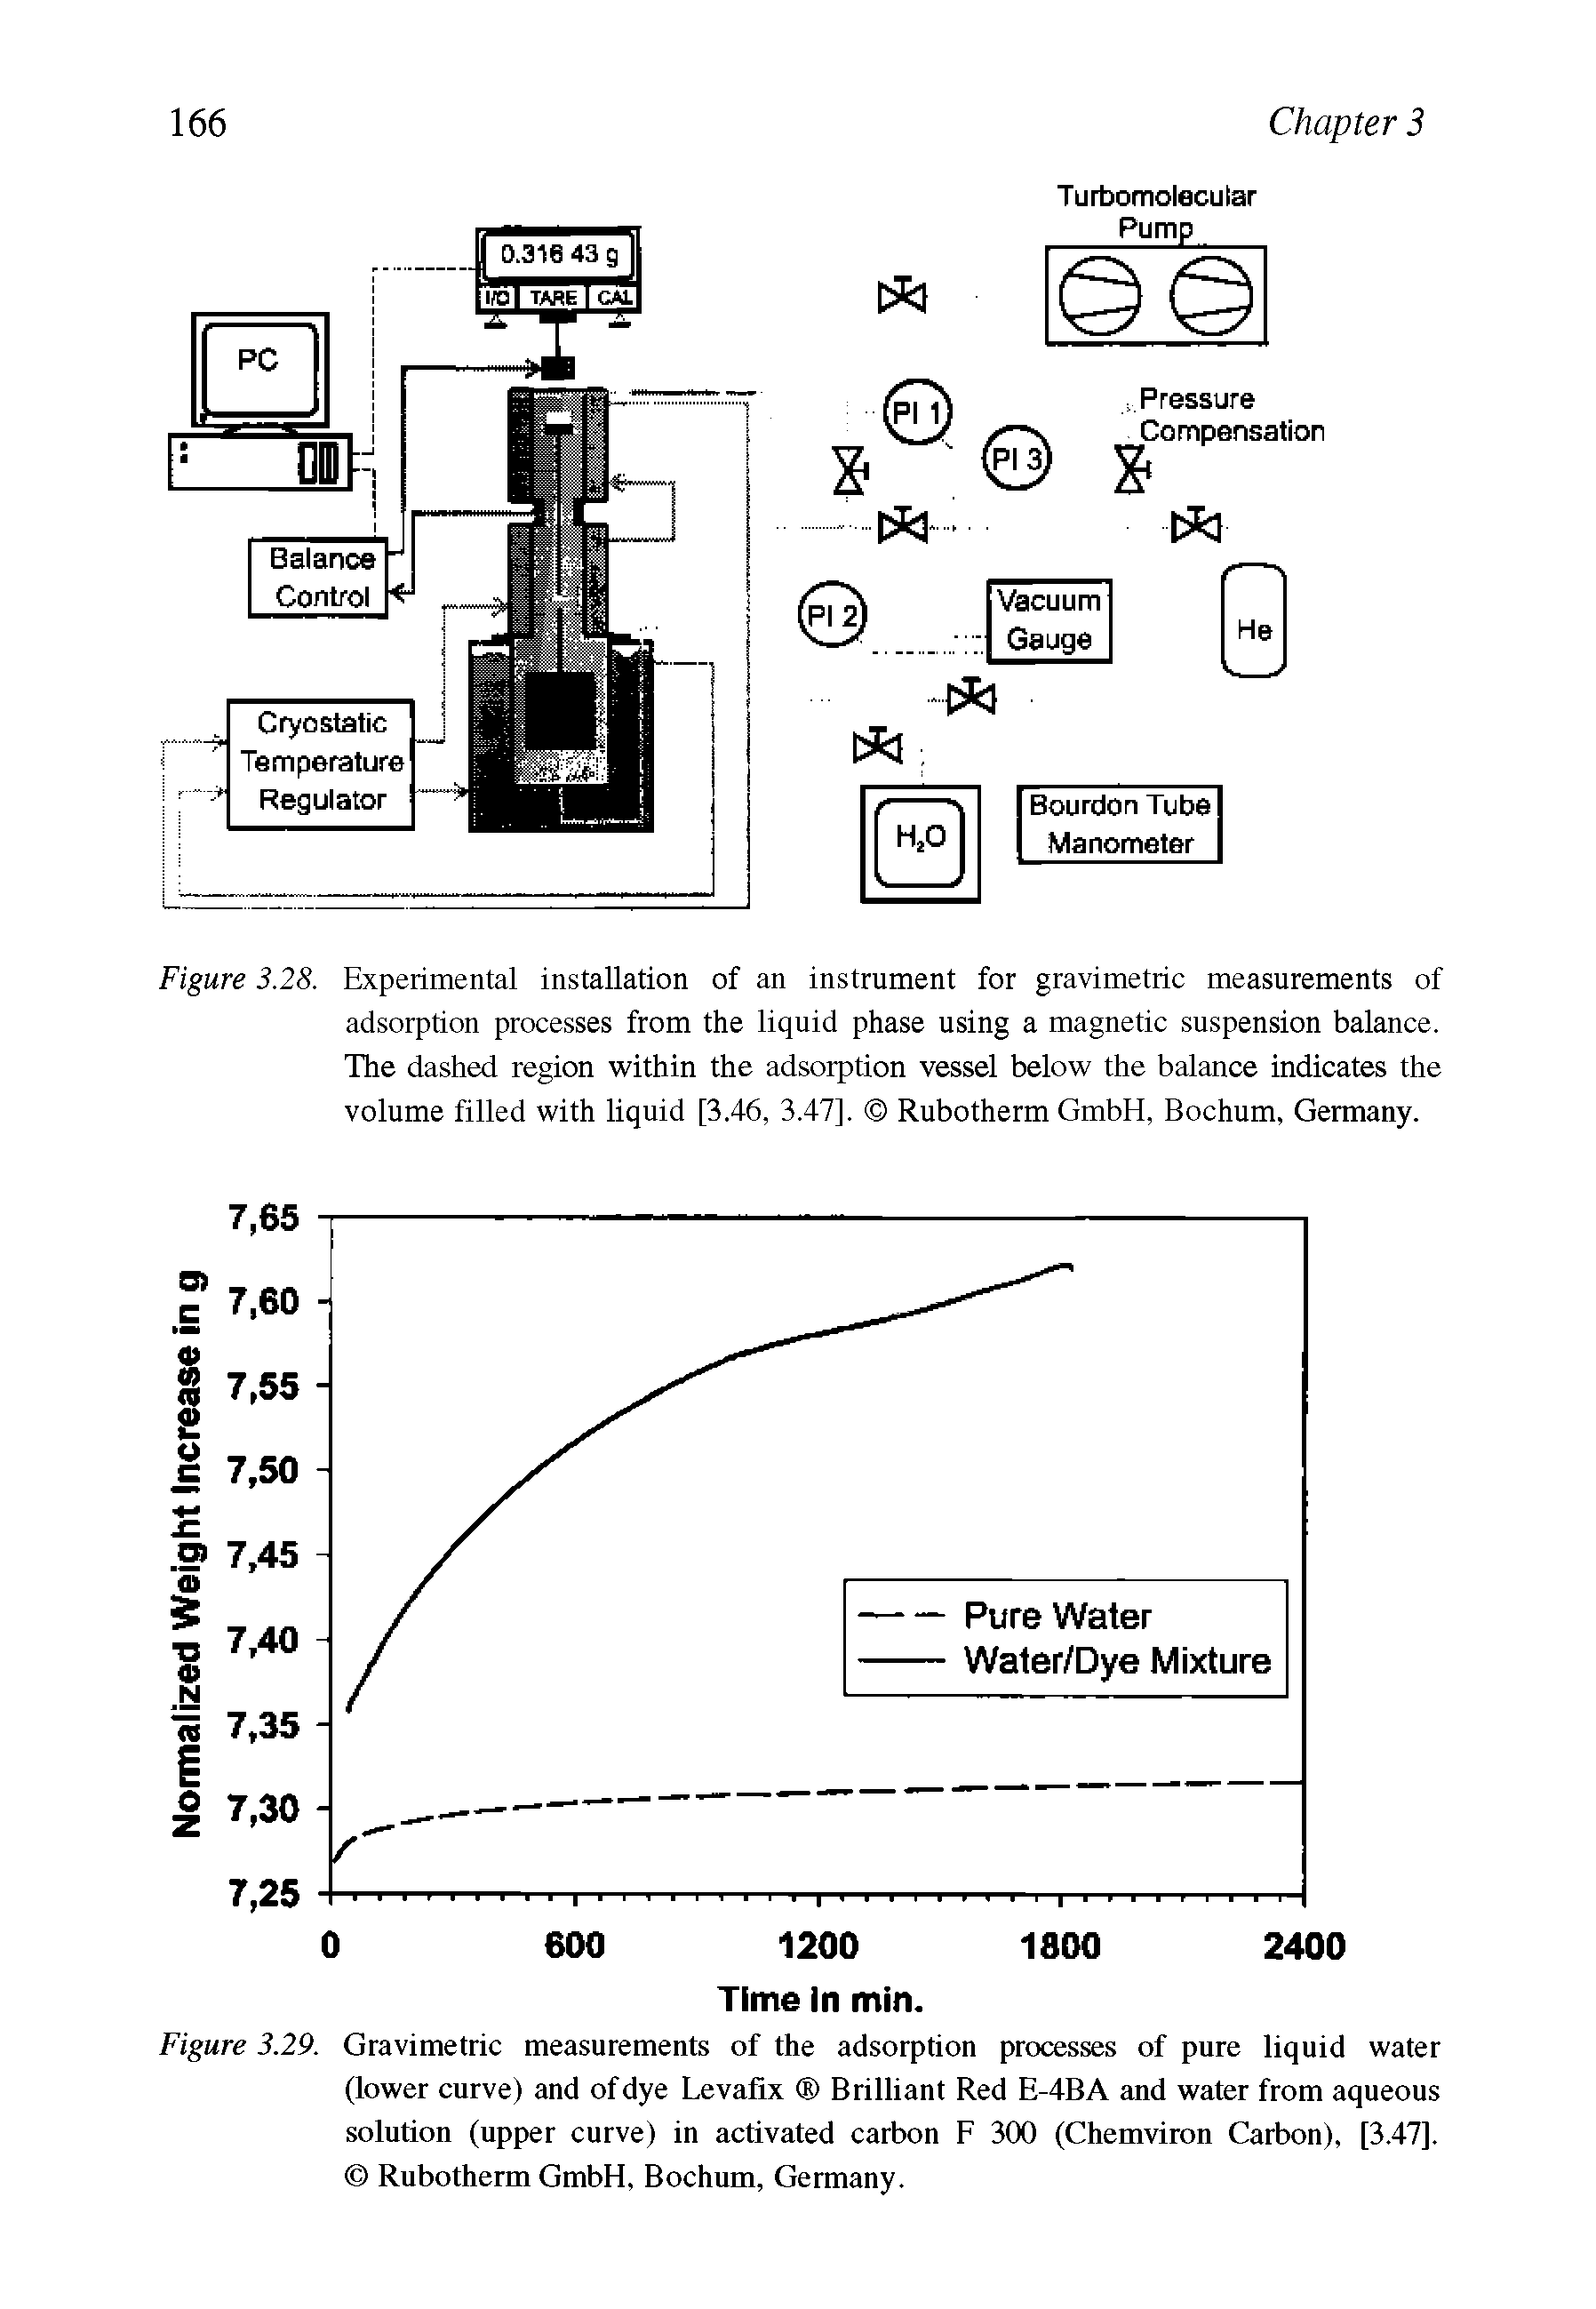 Figure 3.28. Experimental installation of an instrument for gravimetric measurements of adsorption processes from the liquid phase using a magnetic suspension balance. The dashed region within the adsorption vessel below the balance indicates the volume filled with liquid [3.46, 3.47]. Rubotherm GmbH, Bochum, Germany.